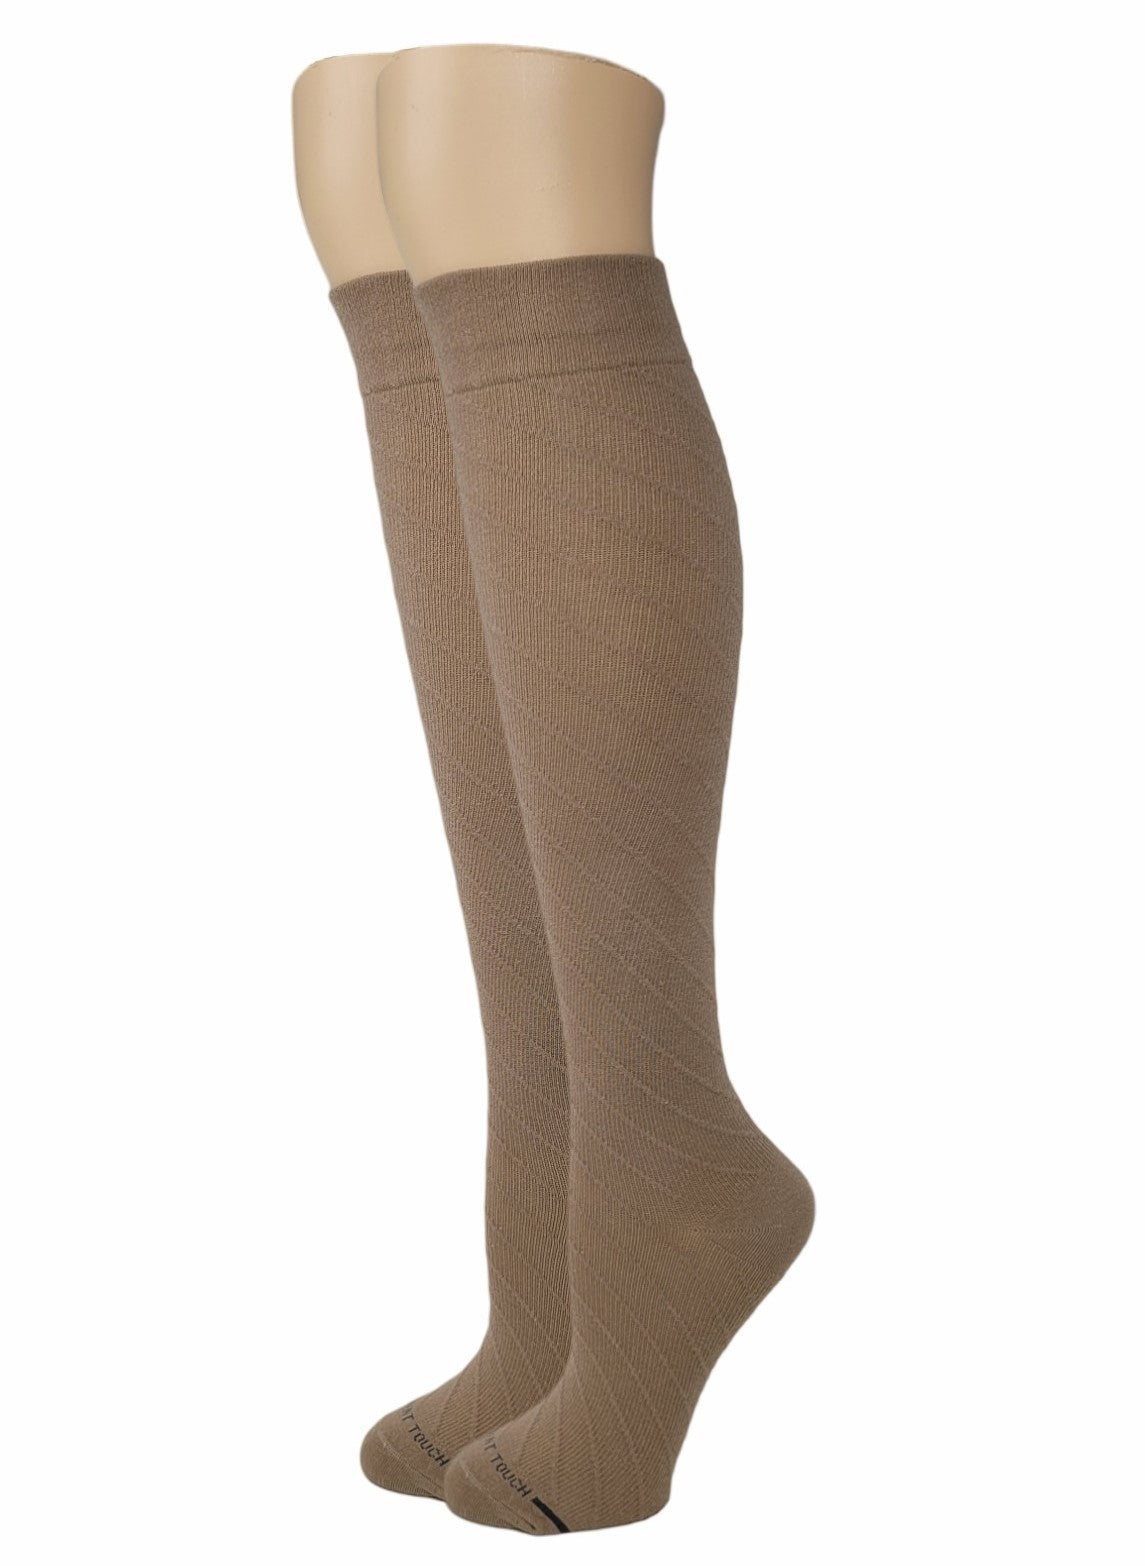 Compression Knee High Socks | 15-20 mmHg Cotton Blend Solid Color | Women (1pair)